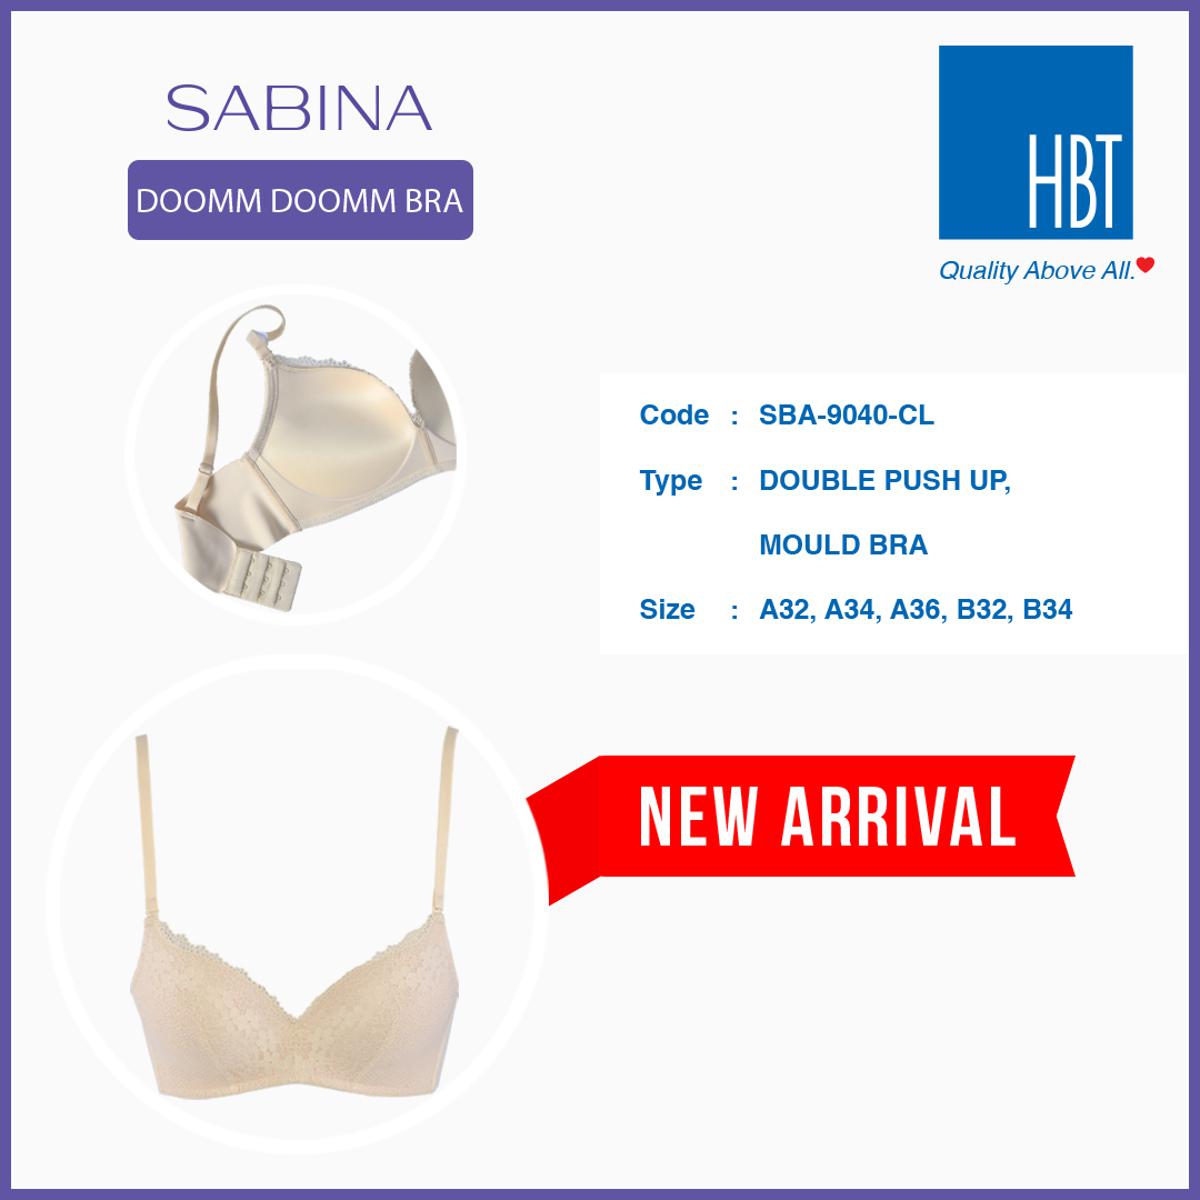 SABINA SOFT DOOMM BRA (Cod : SBH-9024-SL)- Wire Bra, Non-push up, available  in multiple sizes to fit all body types